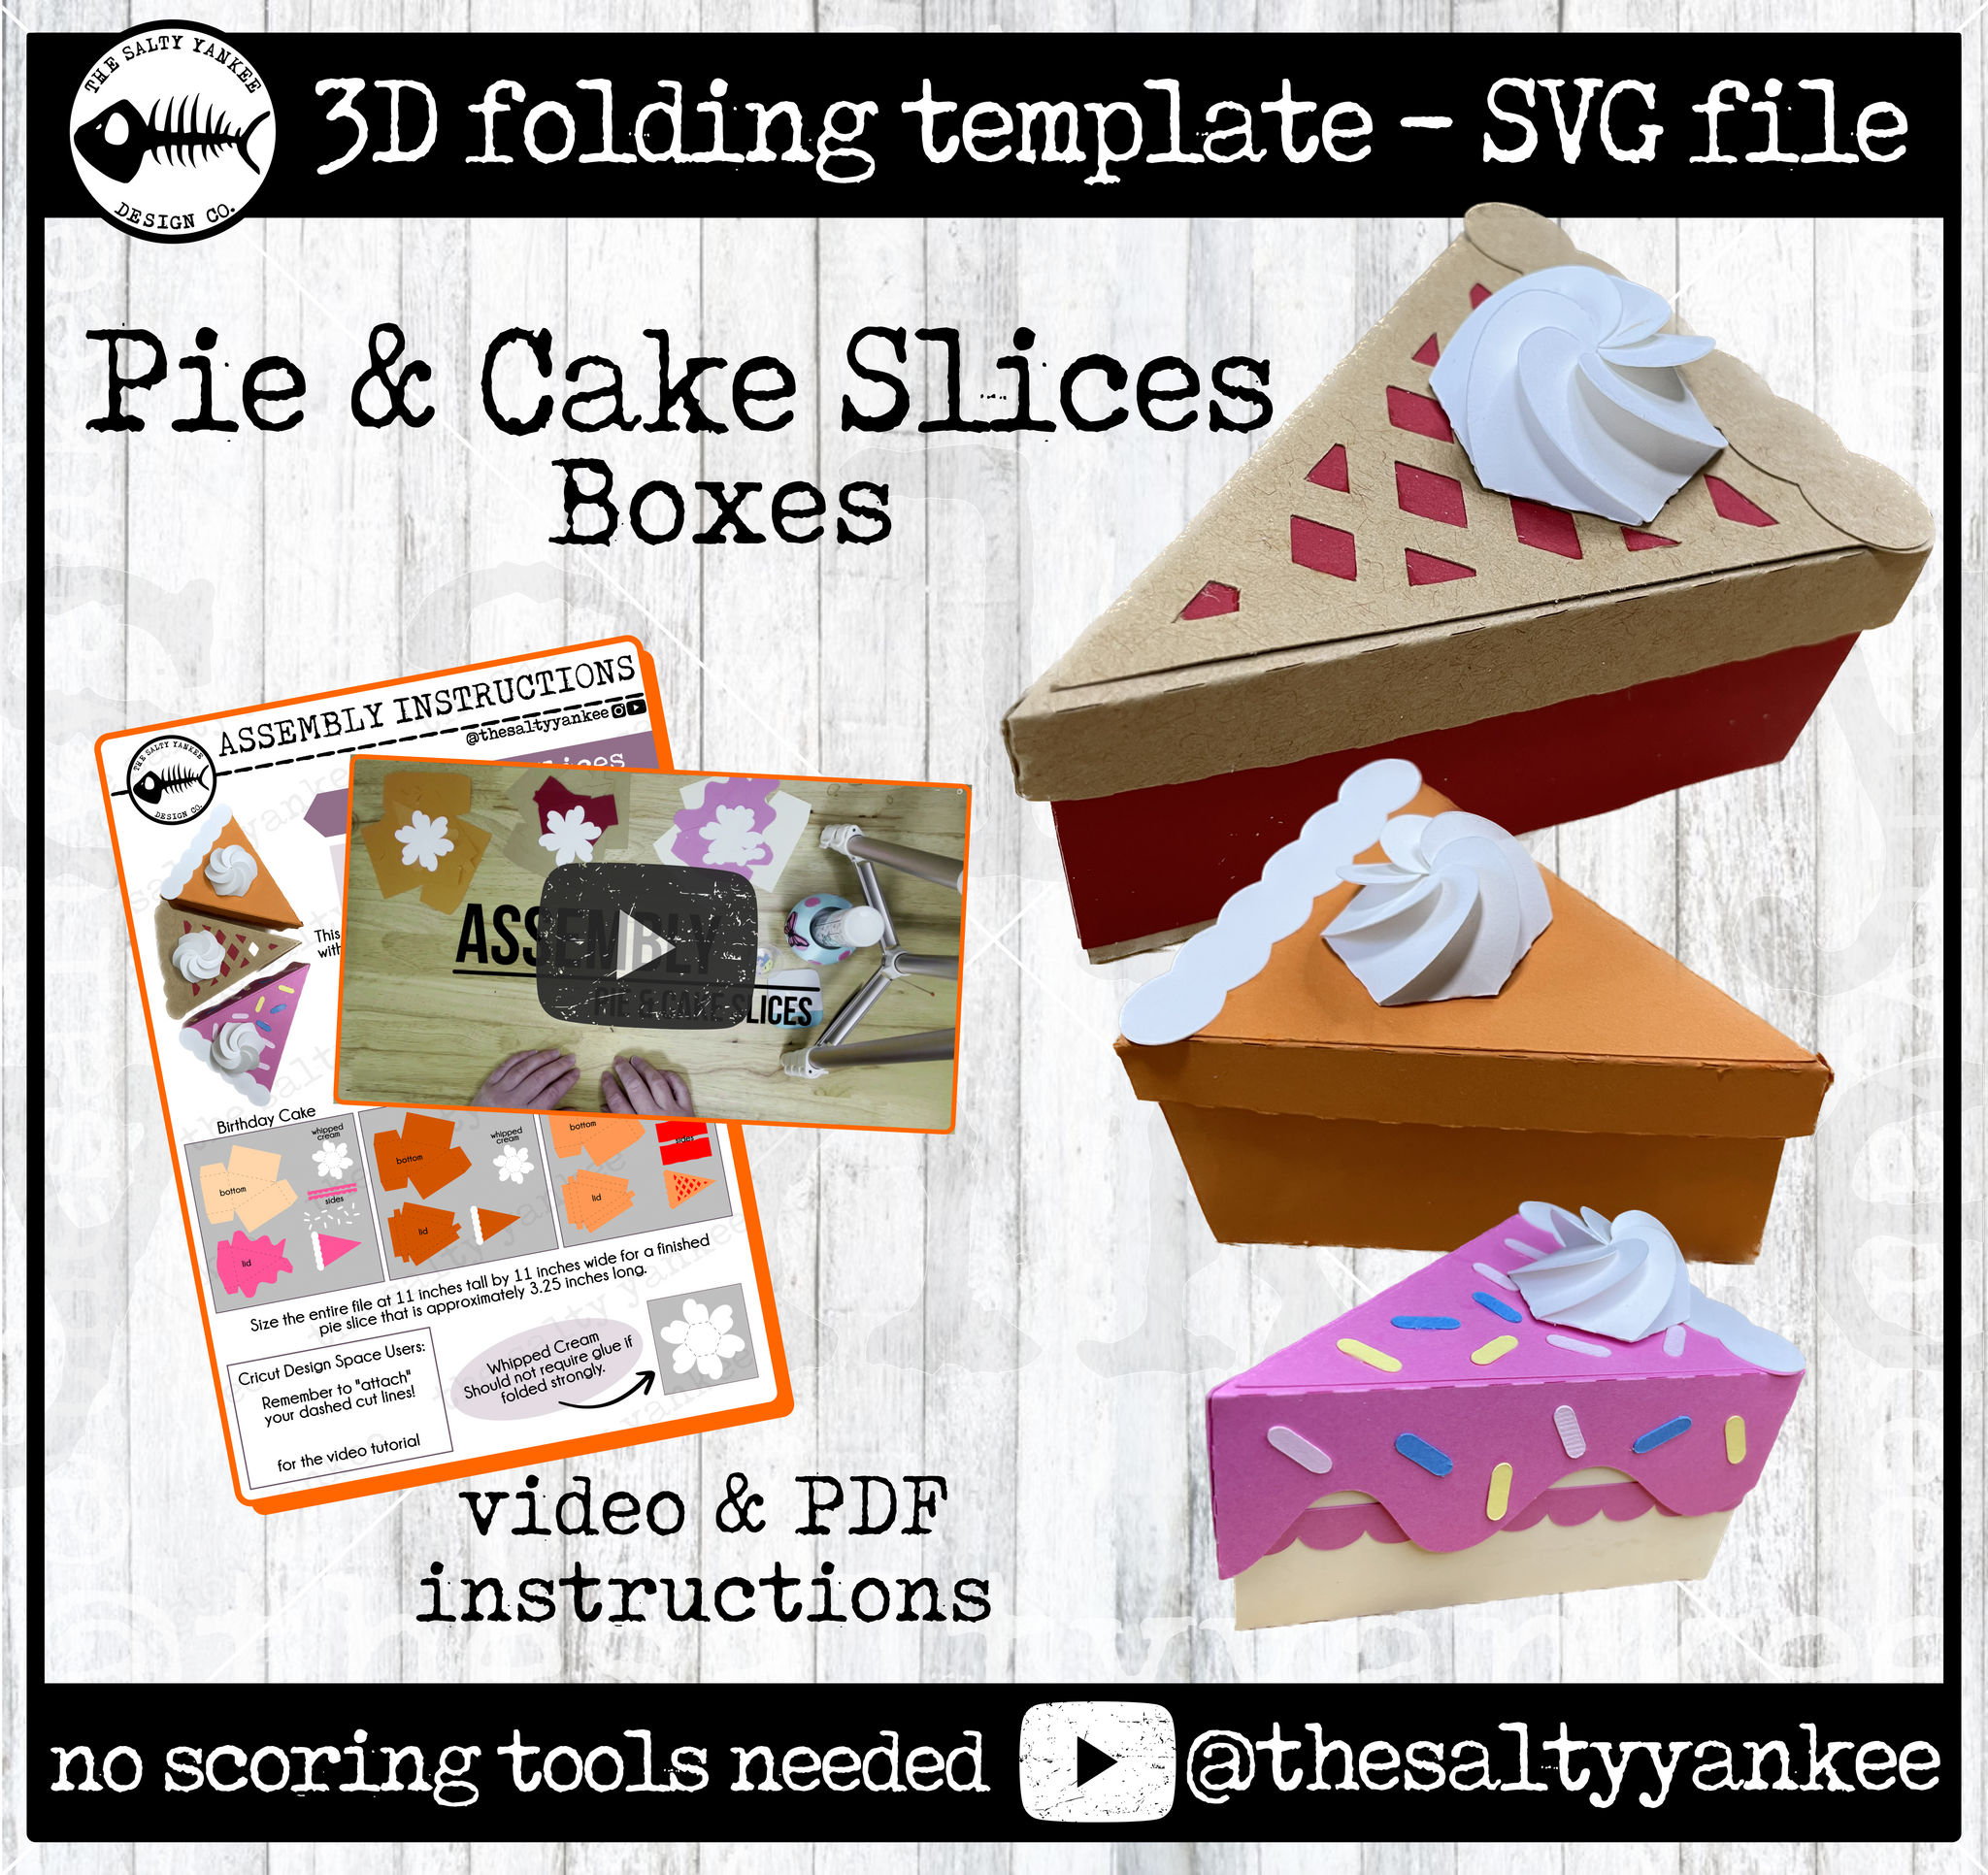 Pie and Cake Slice Boxes - SVG File Download